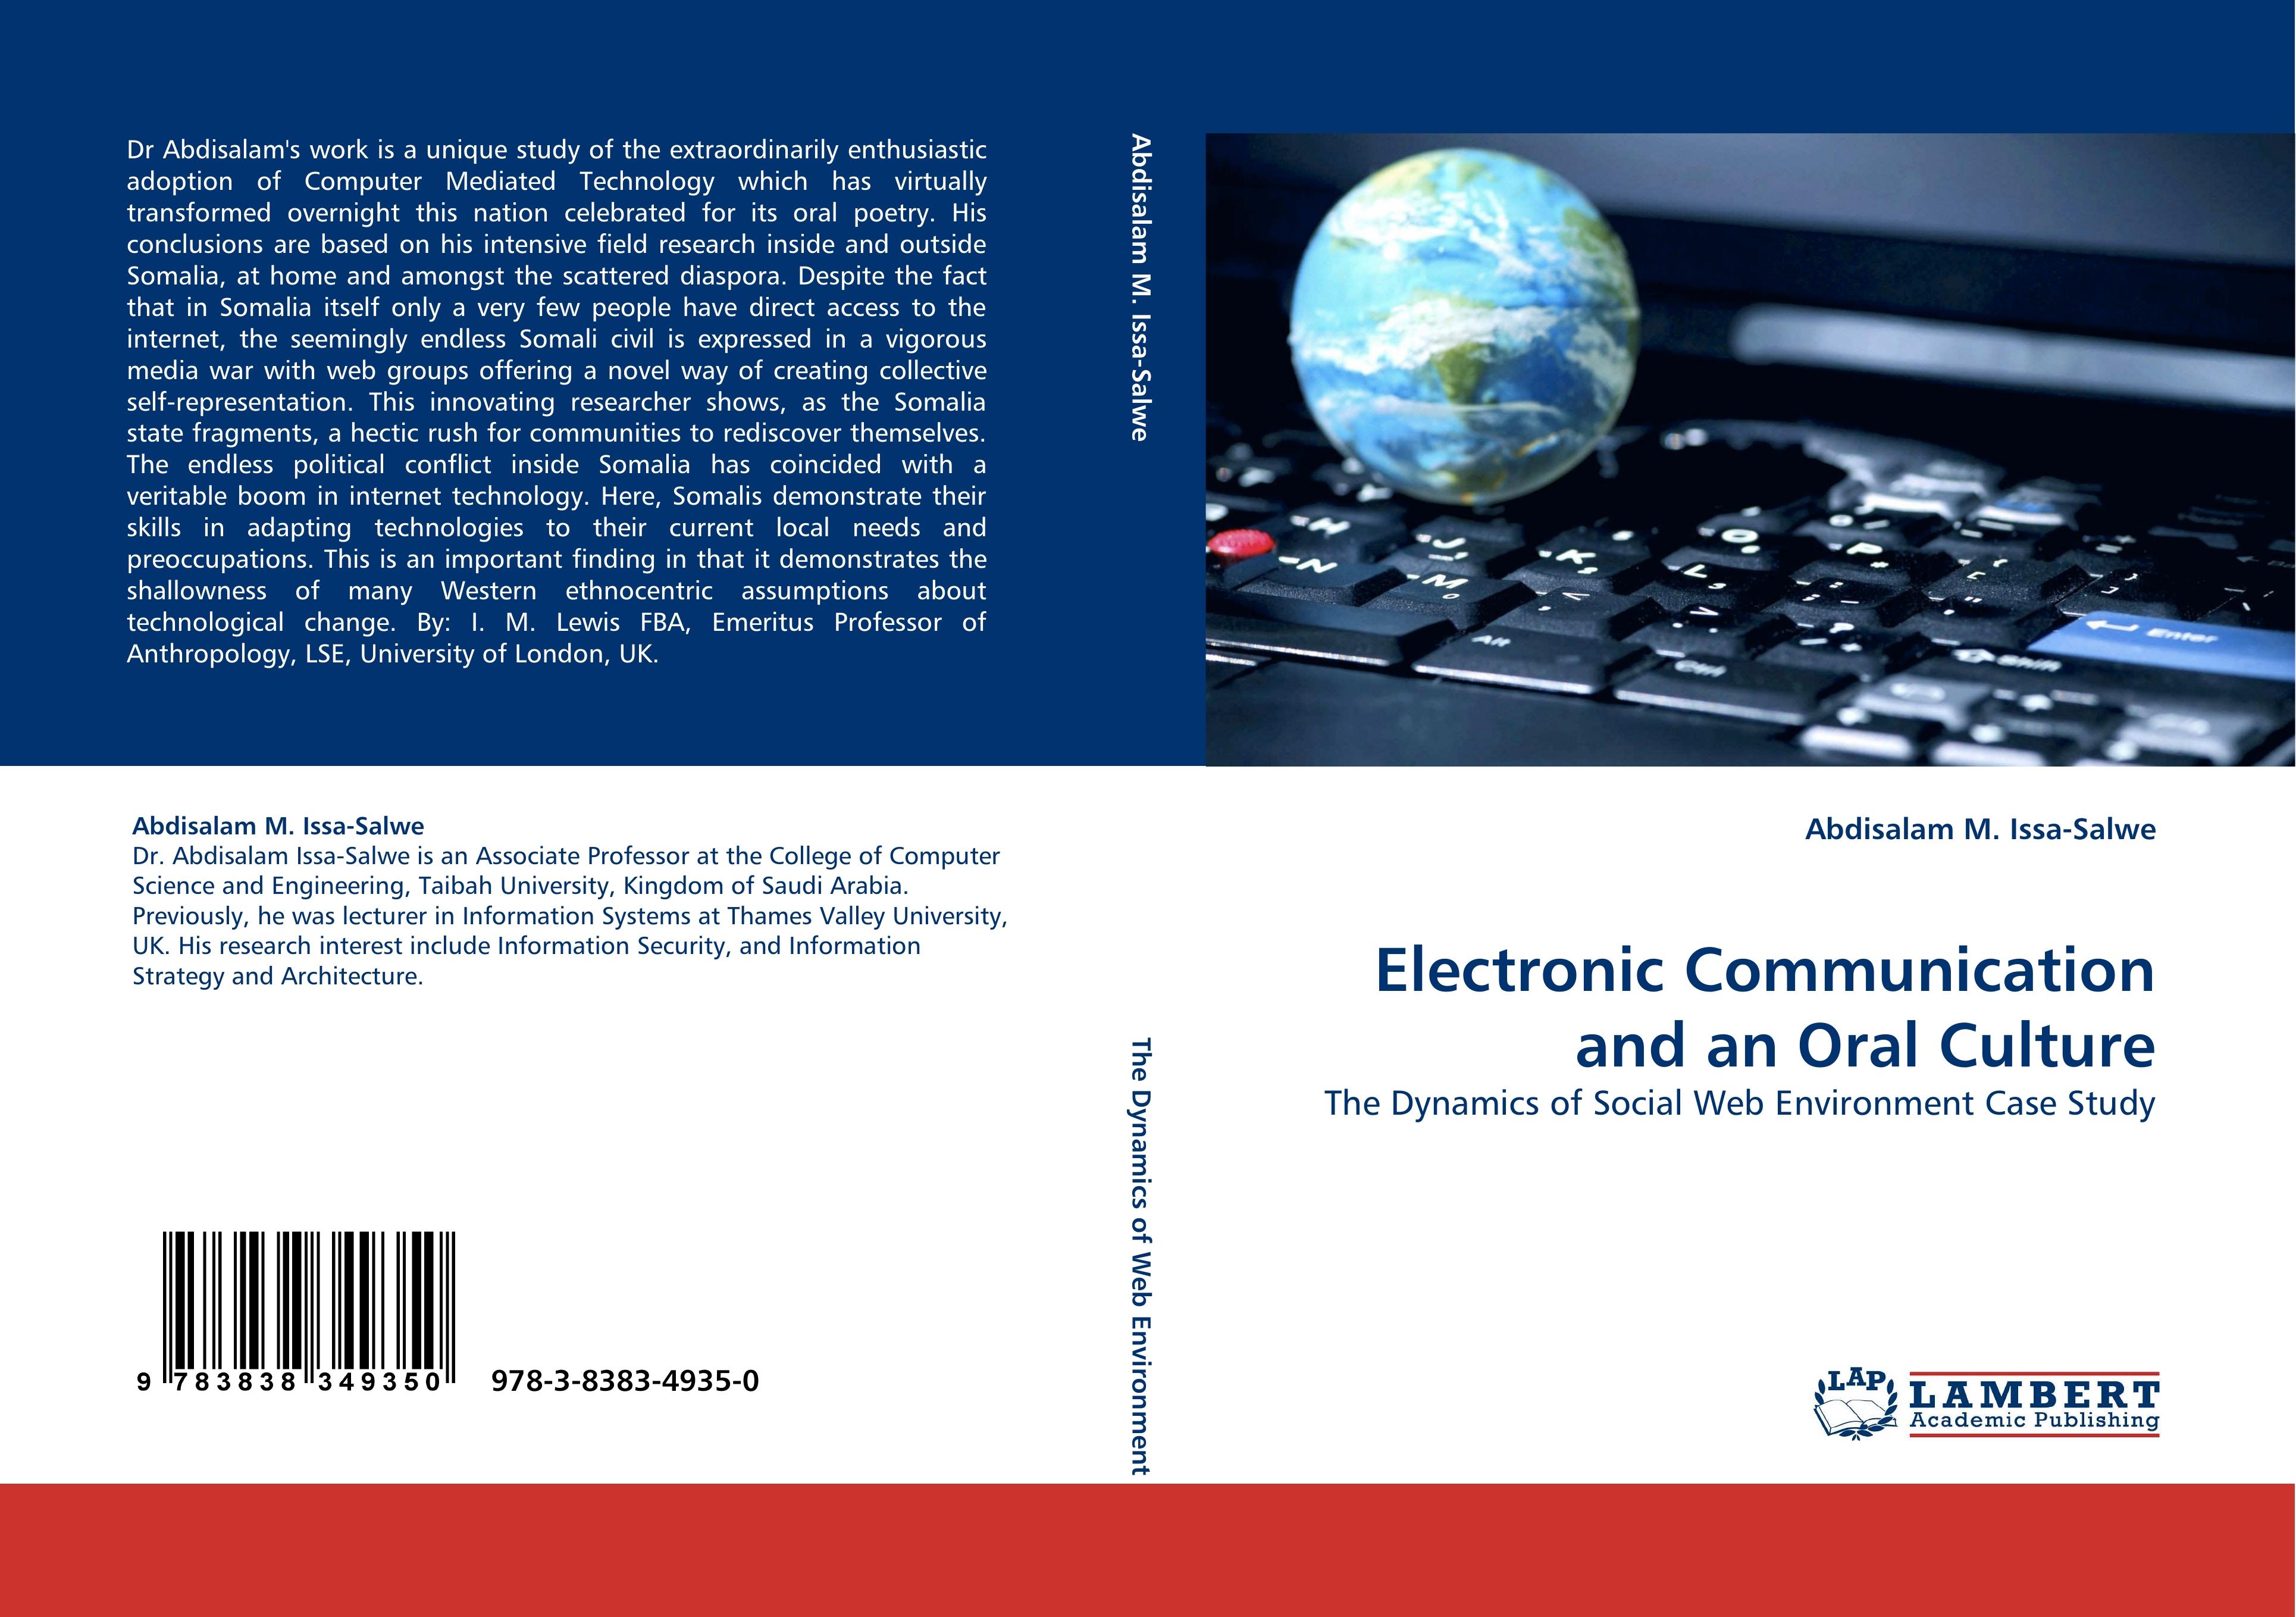 Electronic Communication and an Oral Culture | The Dynamics of Social Web Environment Case Study | Abdisalam M. Issa-Salwe | Taschenbuch | Paperback | 276 S. | Englisch | 2010 | EAN 9783838349350 - Issa-Salwe, Abdisalam M.